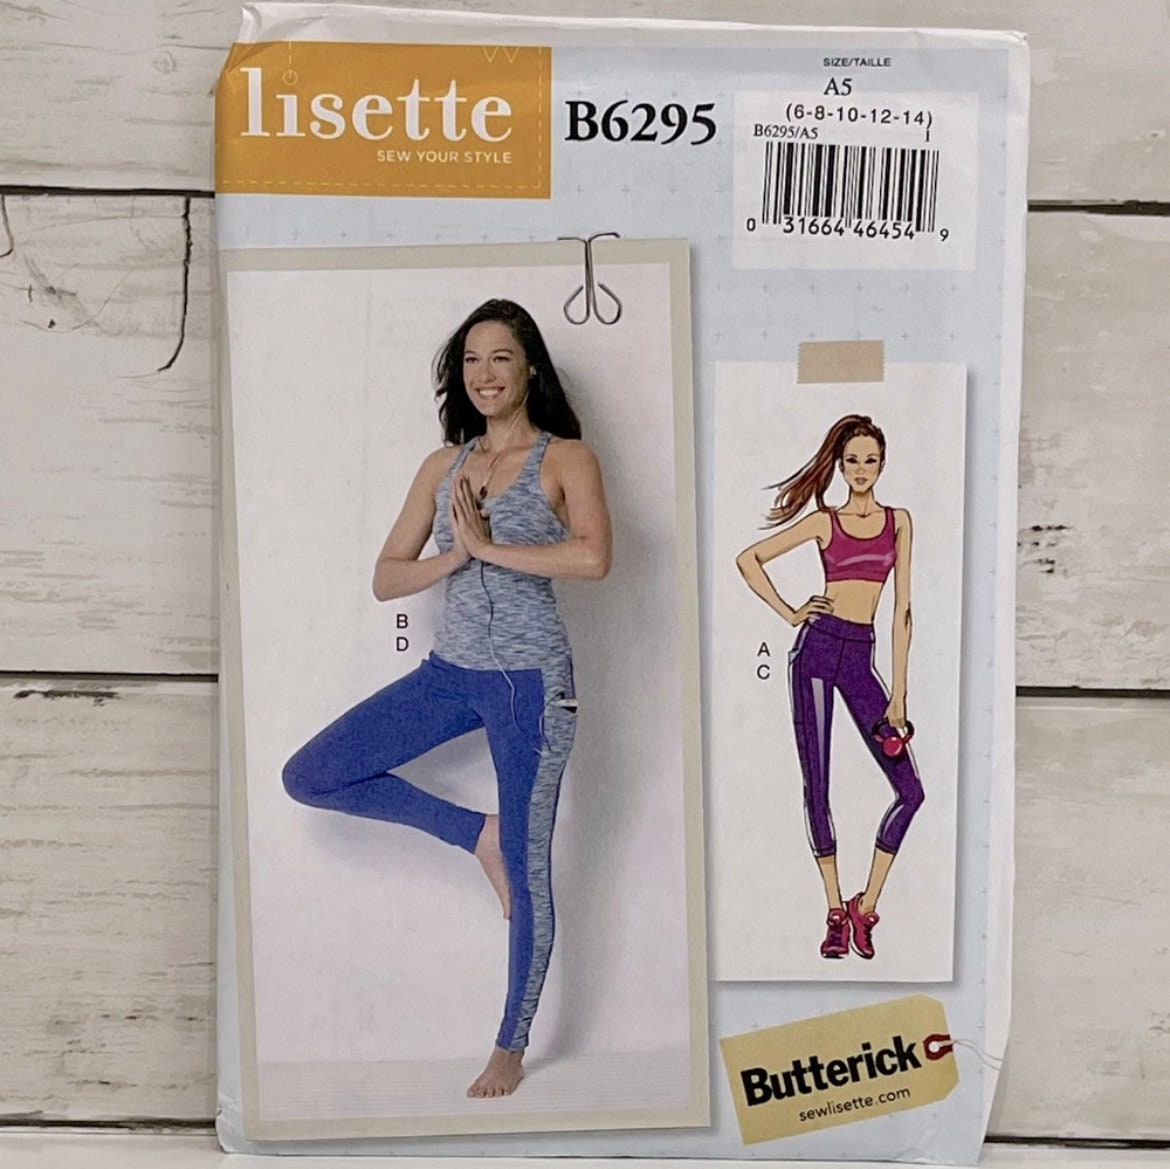 introducing the Lisette B6295 athletic wear pattern  Sewing pattern shop,  Sewing top, Tops for leggings